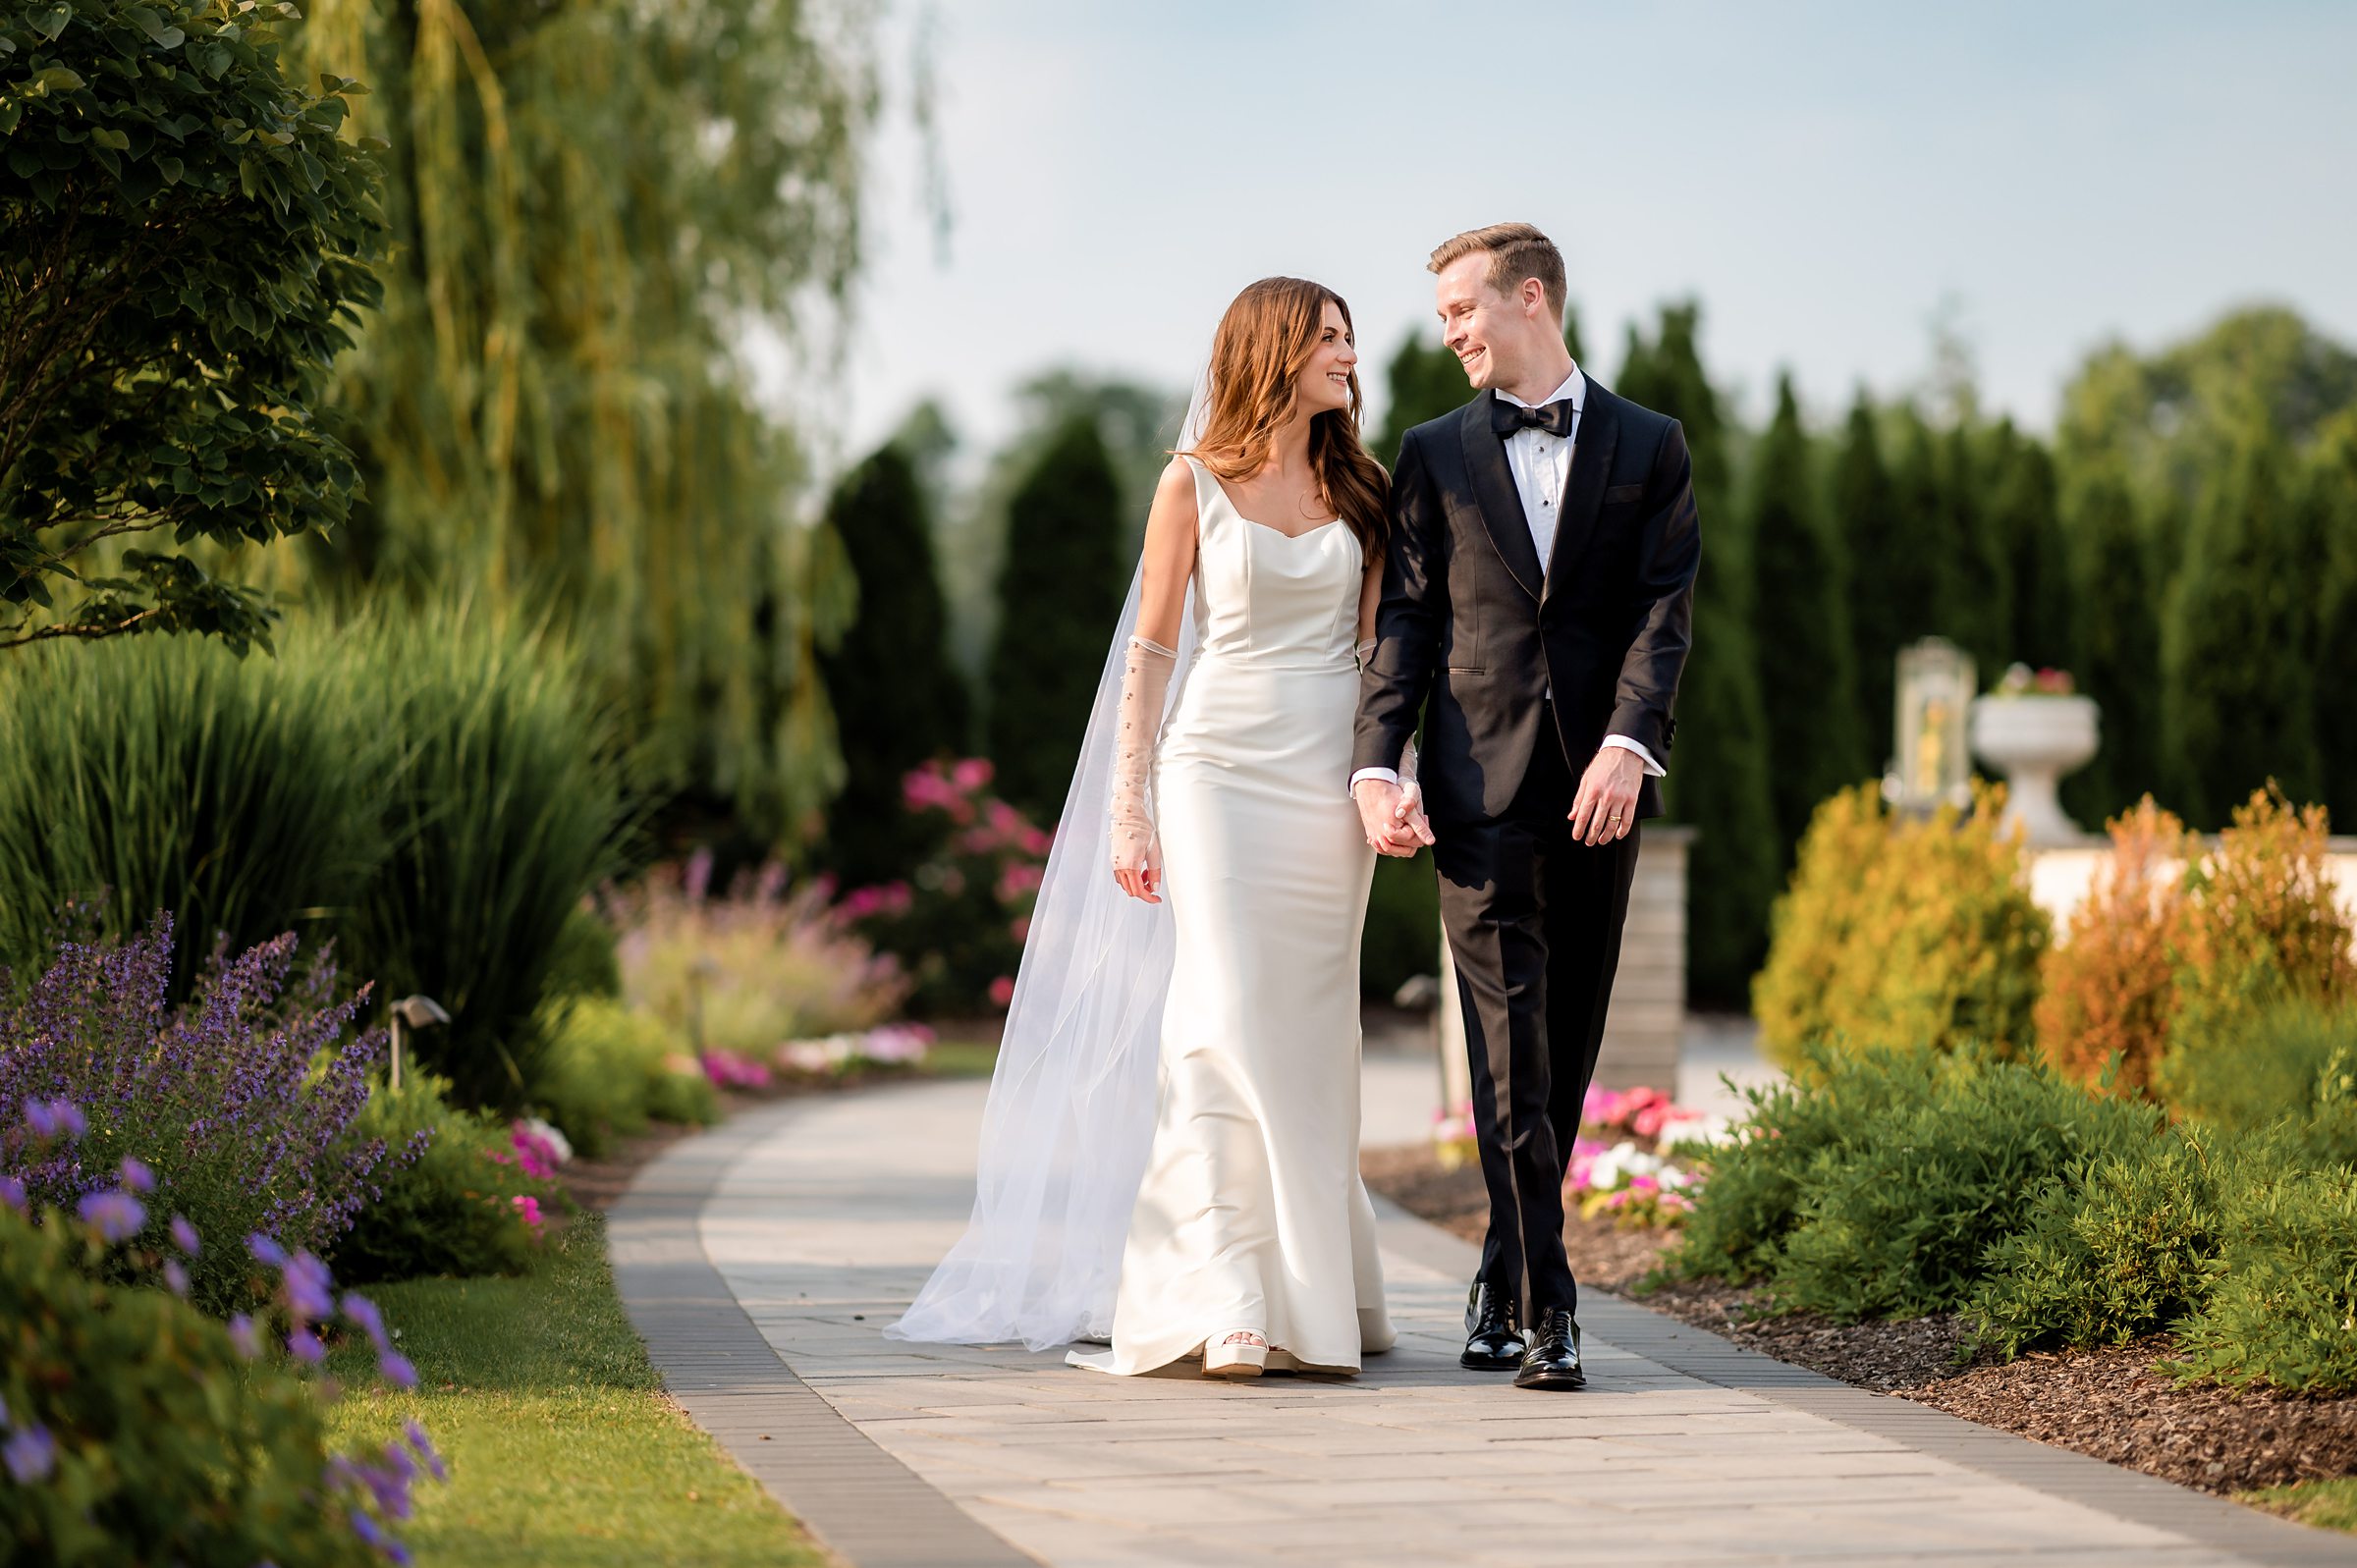 A couple in wedding attire walking hand in hand along a garden path on the grounds of The Mansion on Main Street in Voorhees NJ